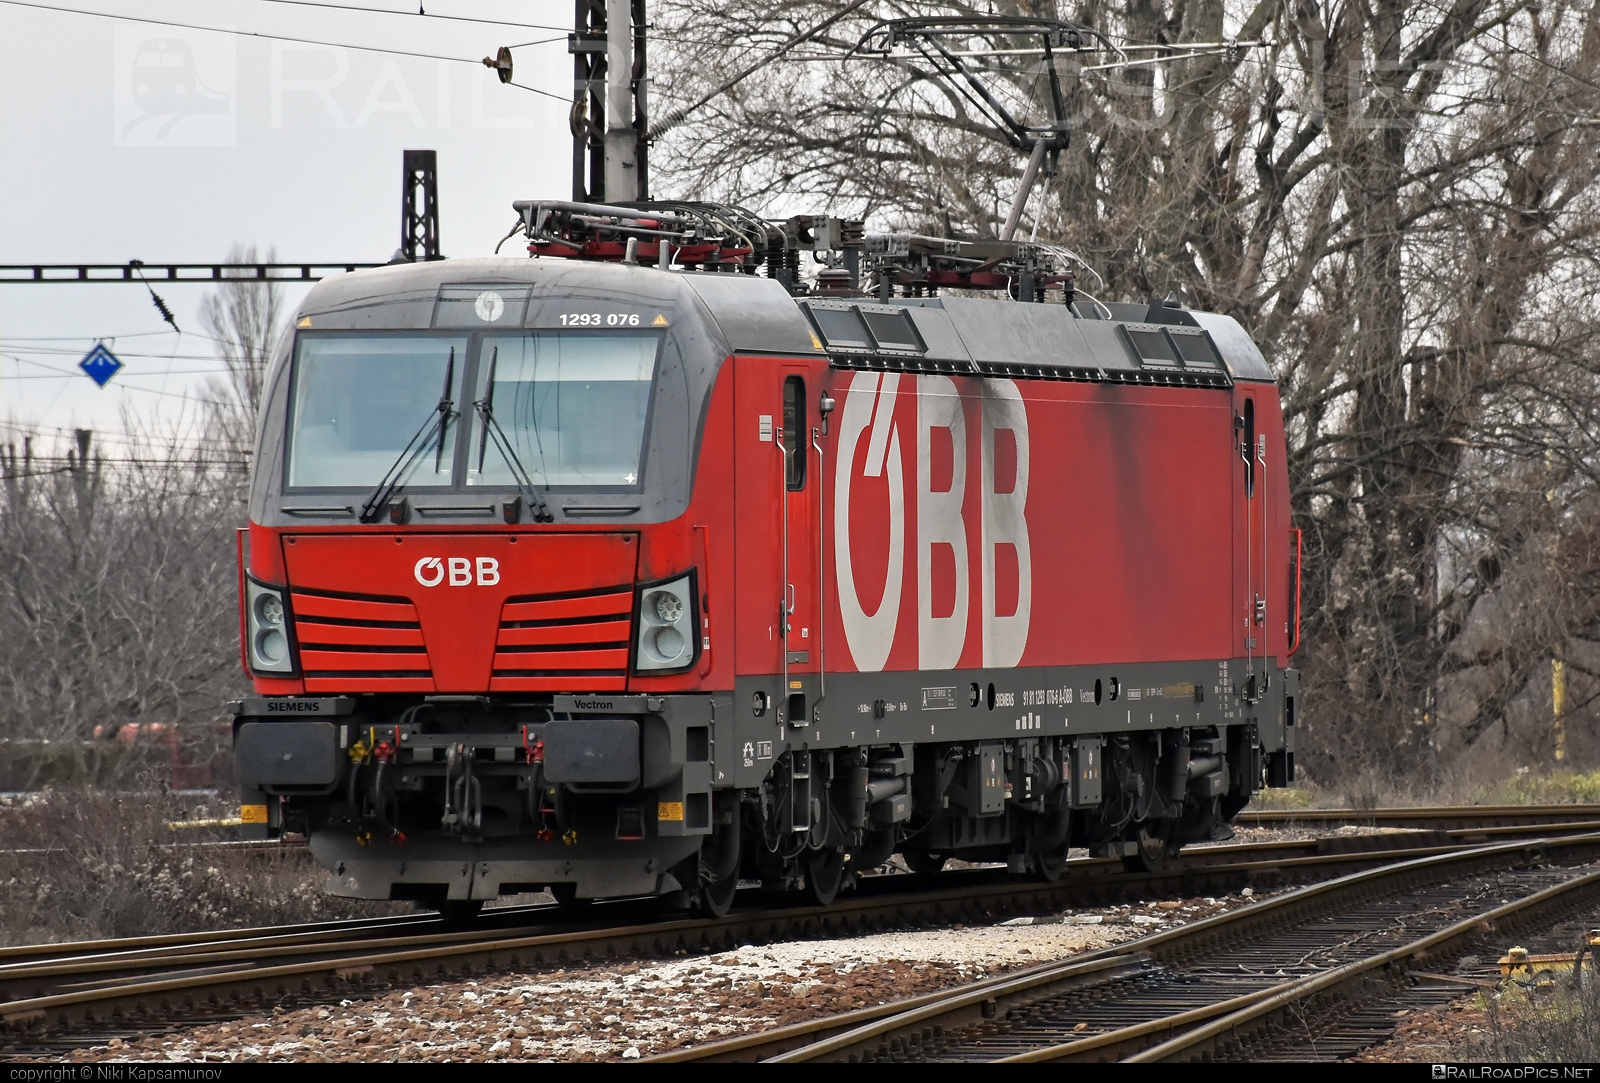 Siemens Vectron MS - 1293 076 operated by Rail Cargo Carrier – Slovakia s.r.o. #obb #osterreichischebundesbahnen #rccsk #siemens #siemensVectron #siemensVectronMS #vectron #vectronMS #wssk